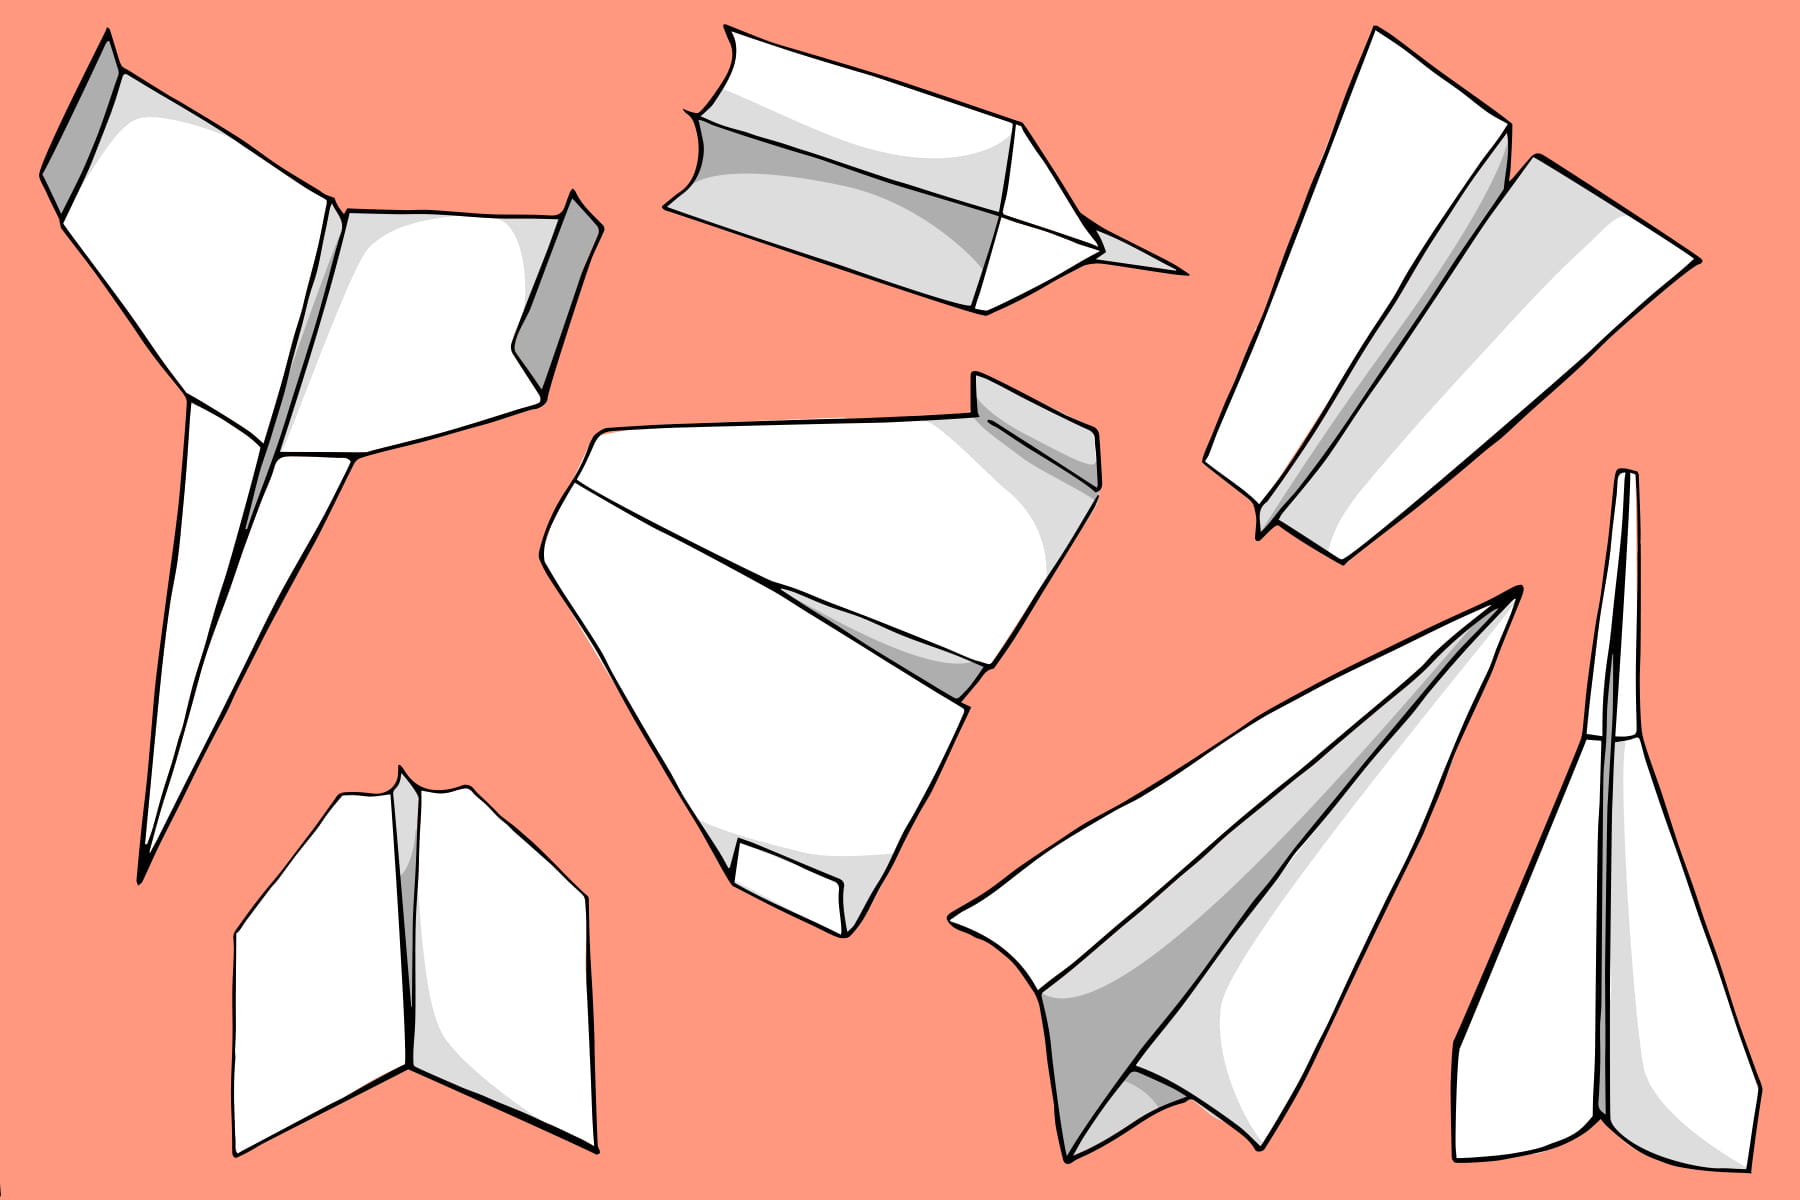 how to make a fast paper airplane that flies far step by step